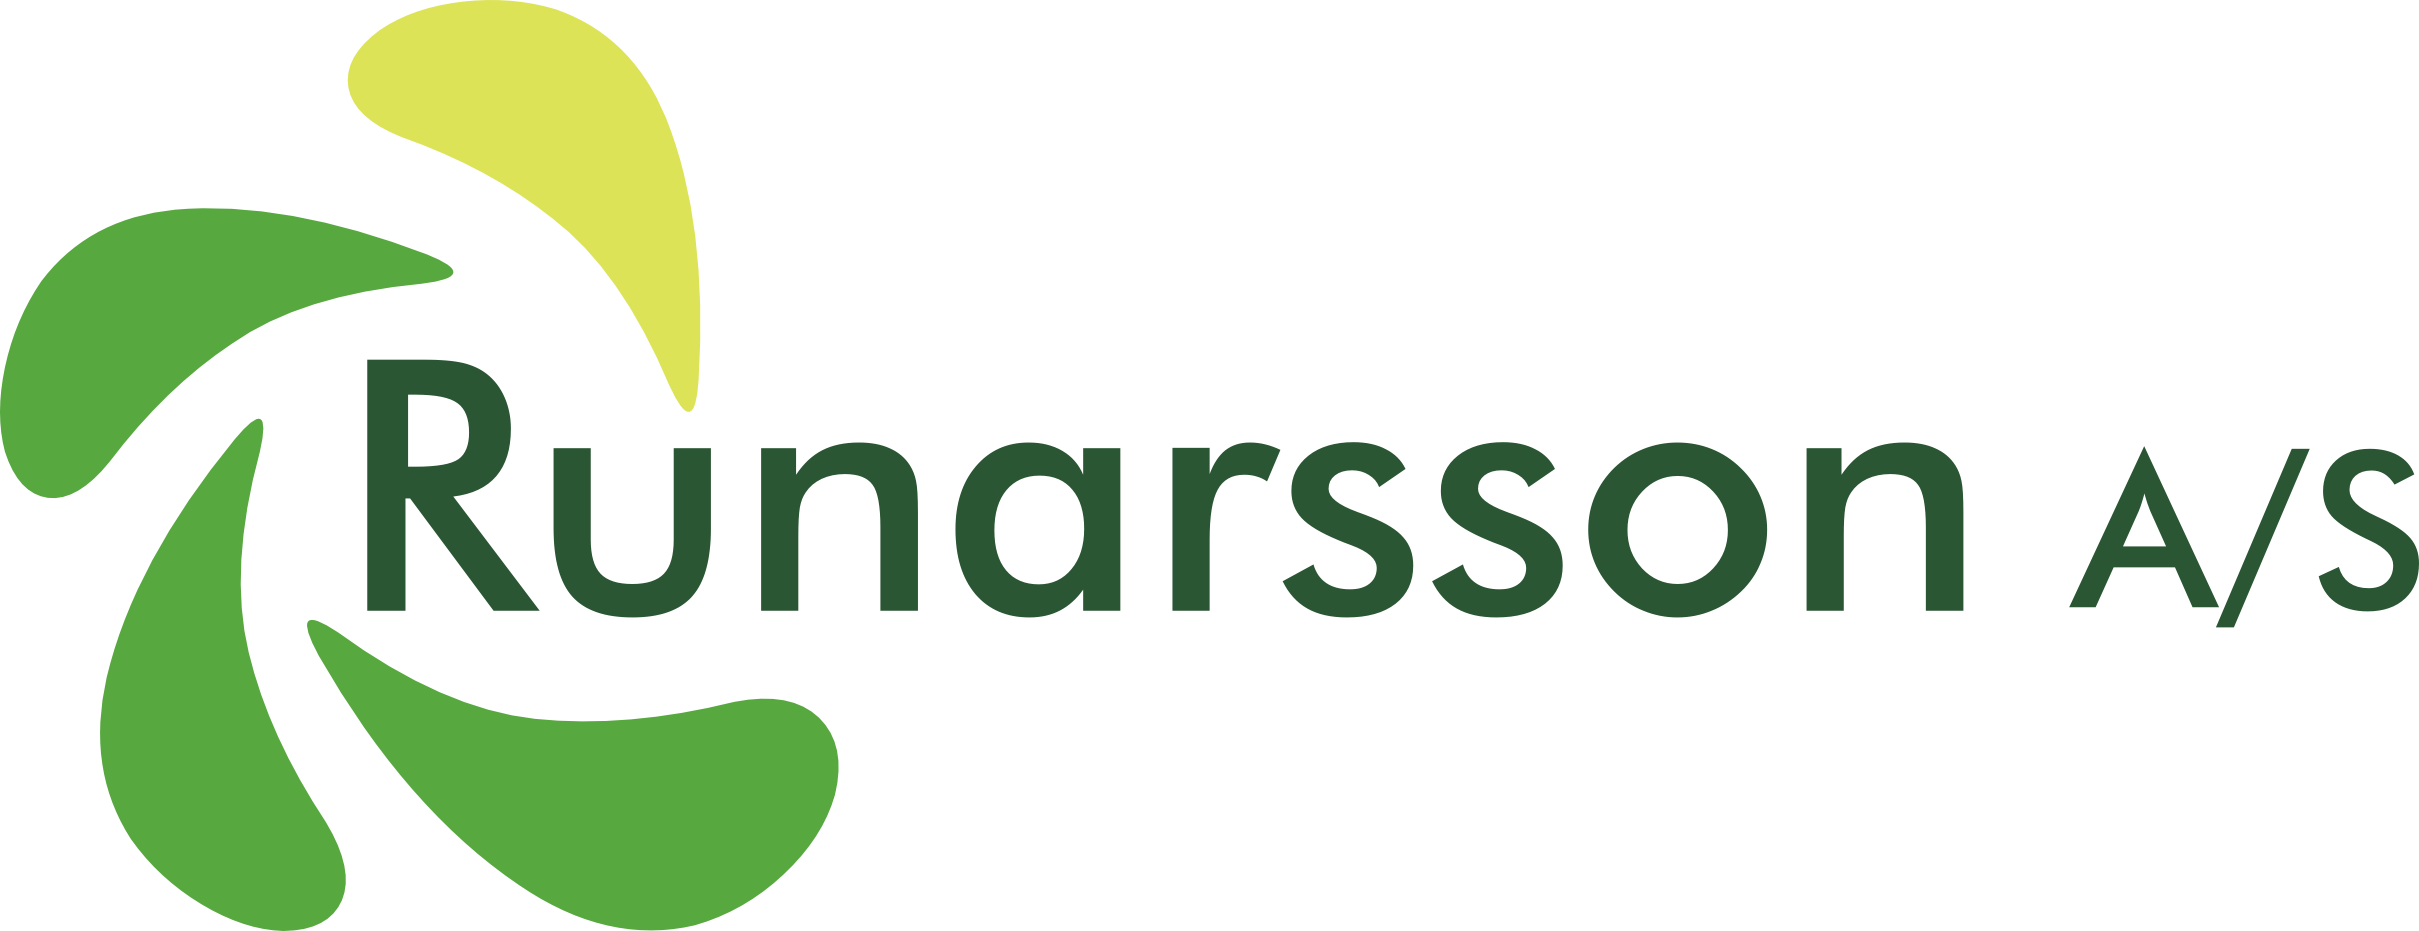 Runnarson – Technical solutions supporting green transition in Europe